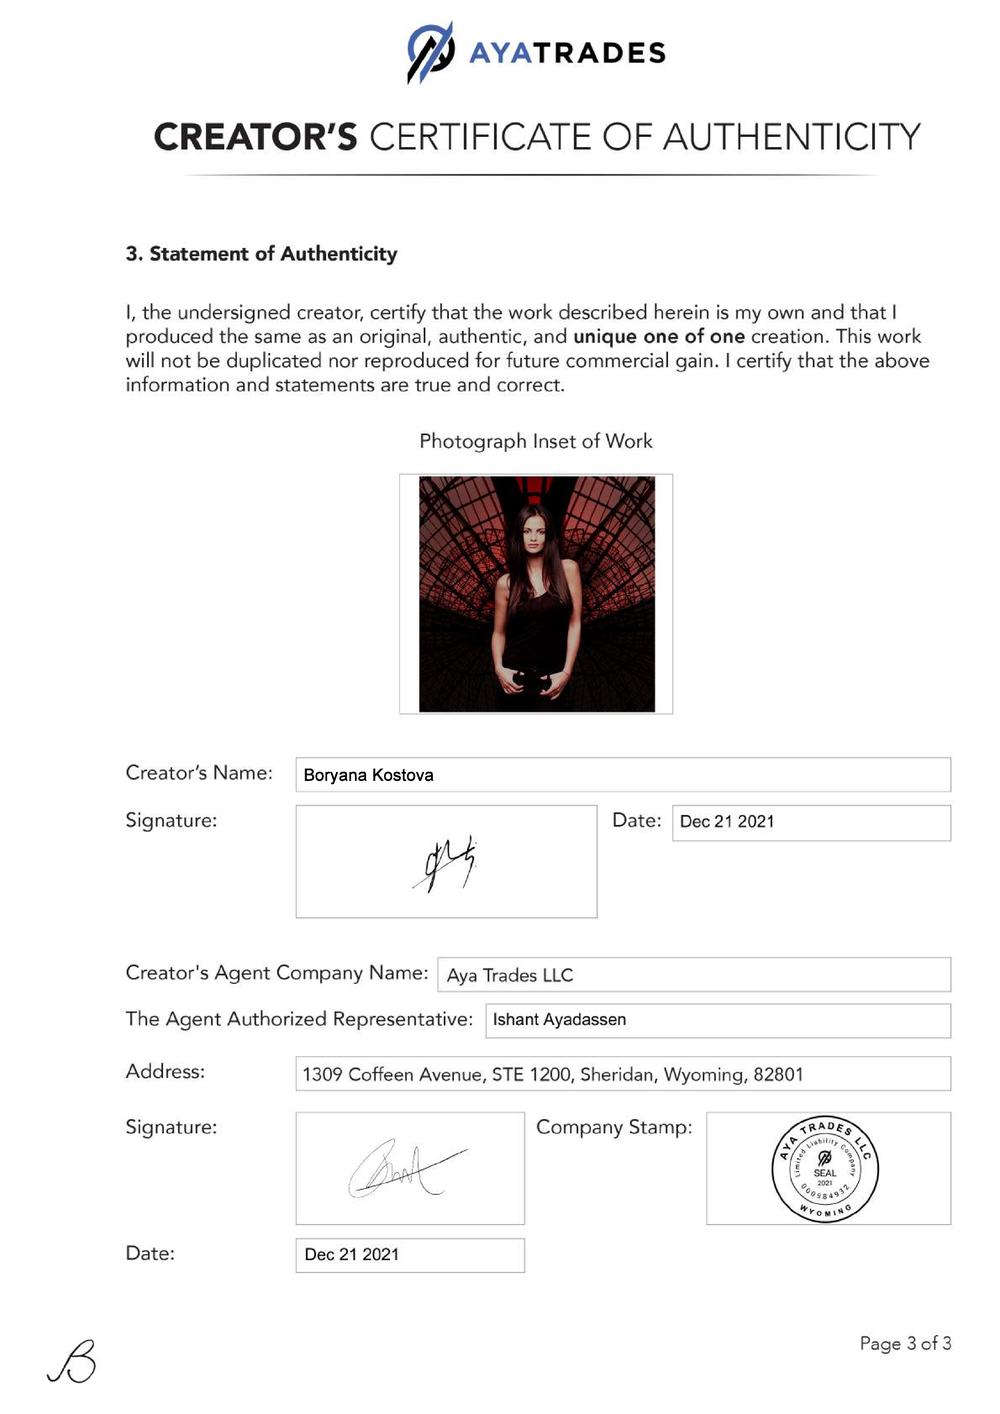 Certificate of Authenticity and Consignment - May 19